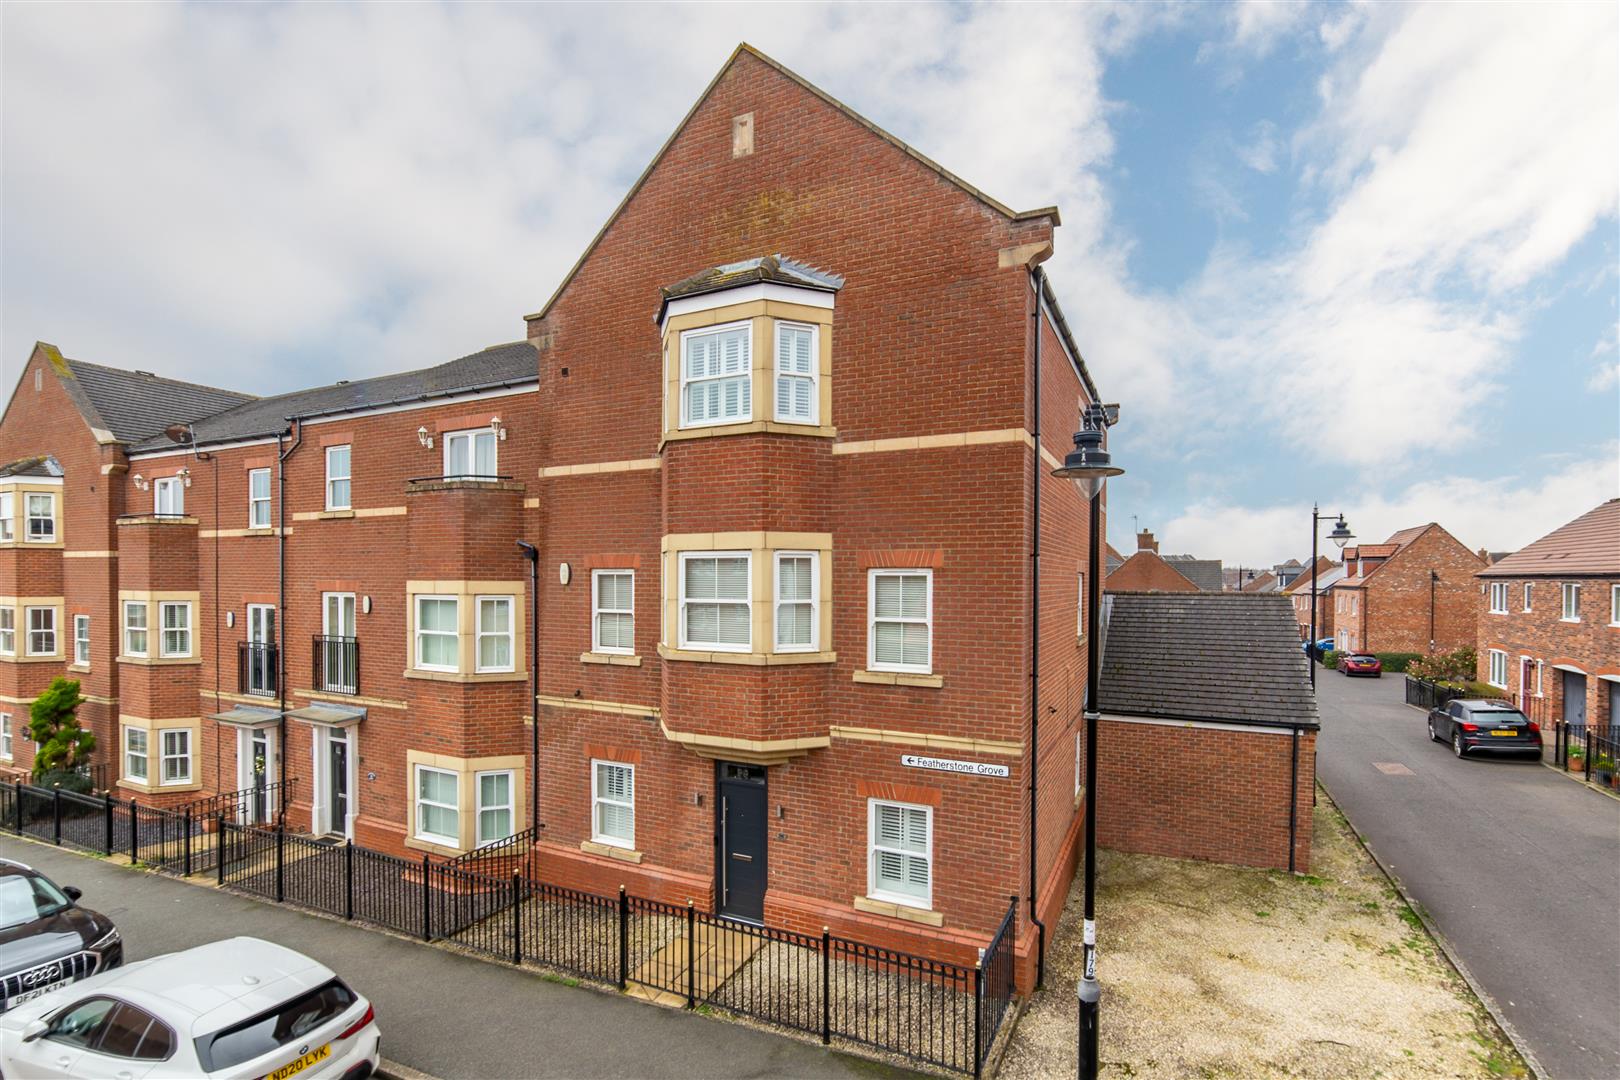 5 bed town house for sale in Featherstone Grove, Gosforth, NE3 